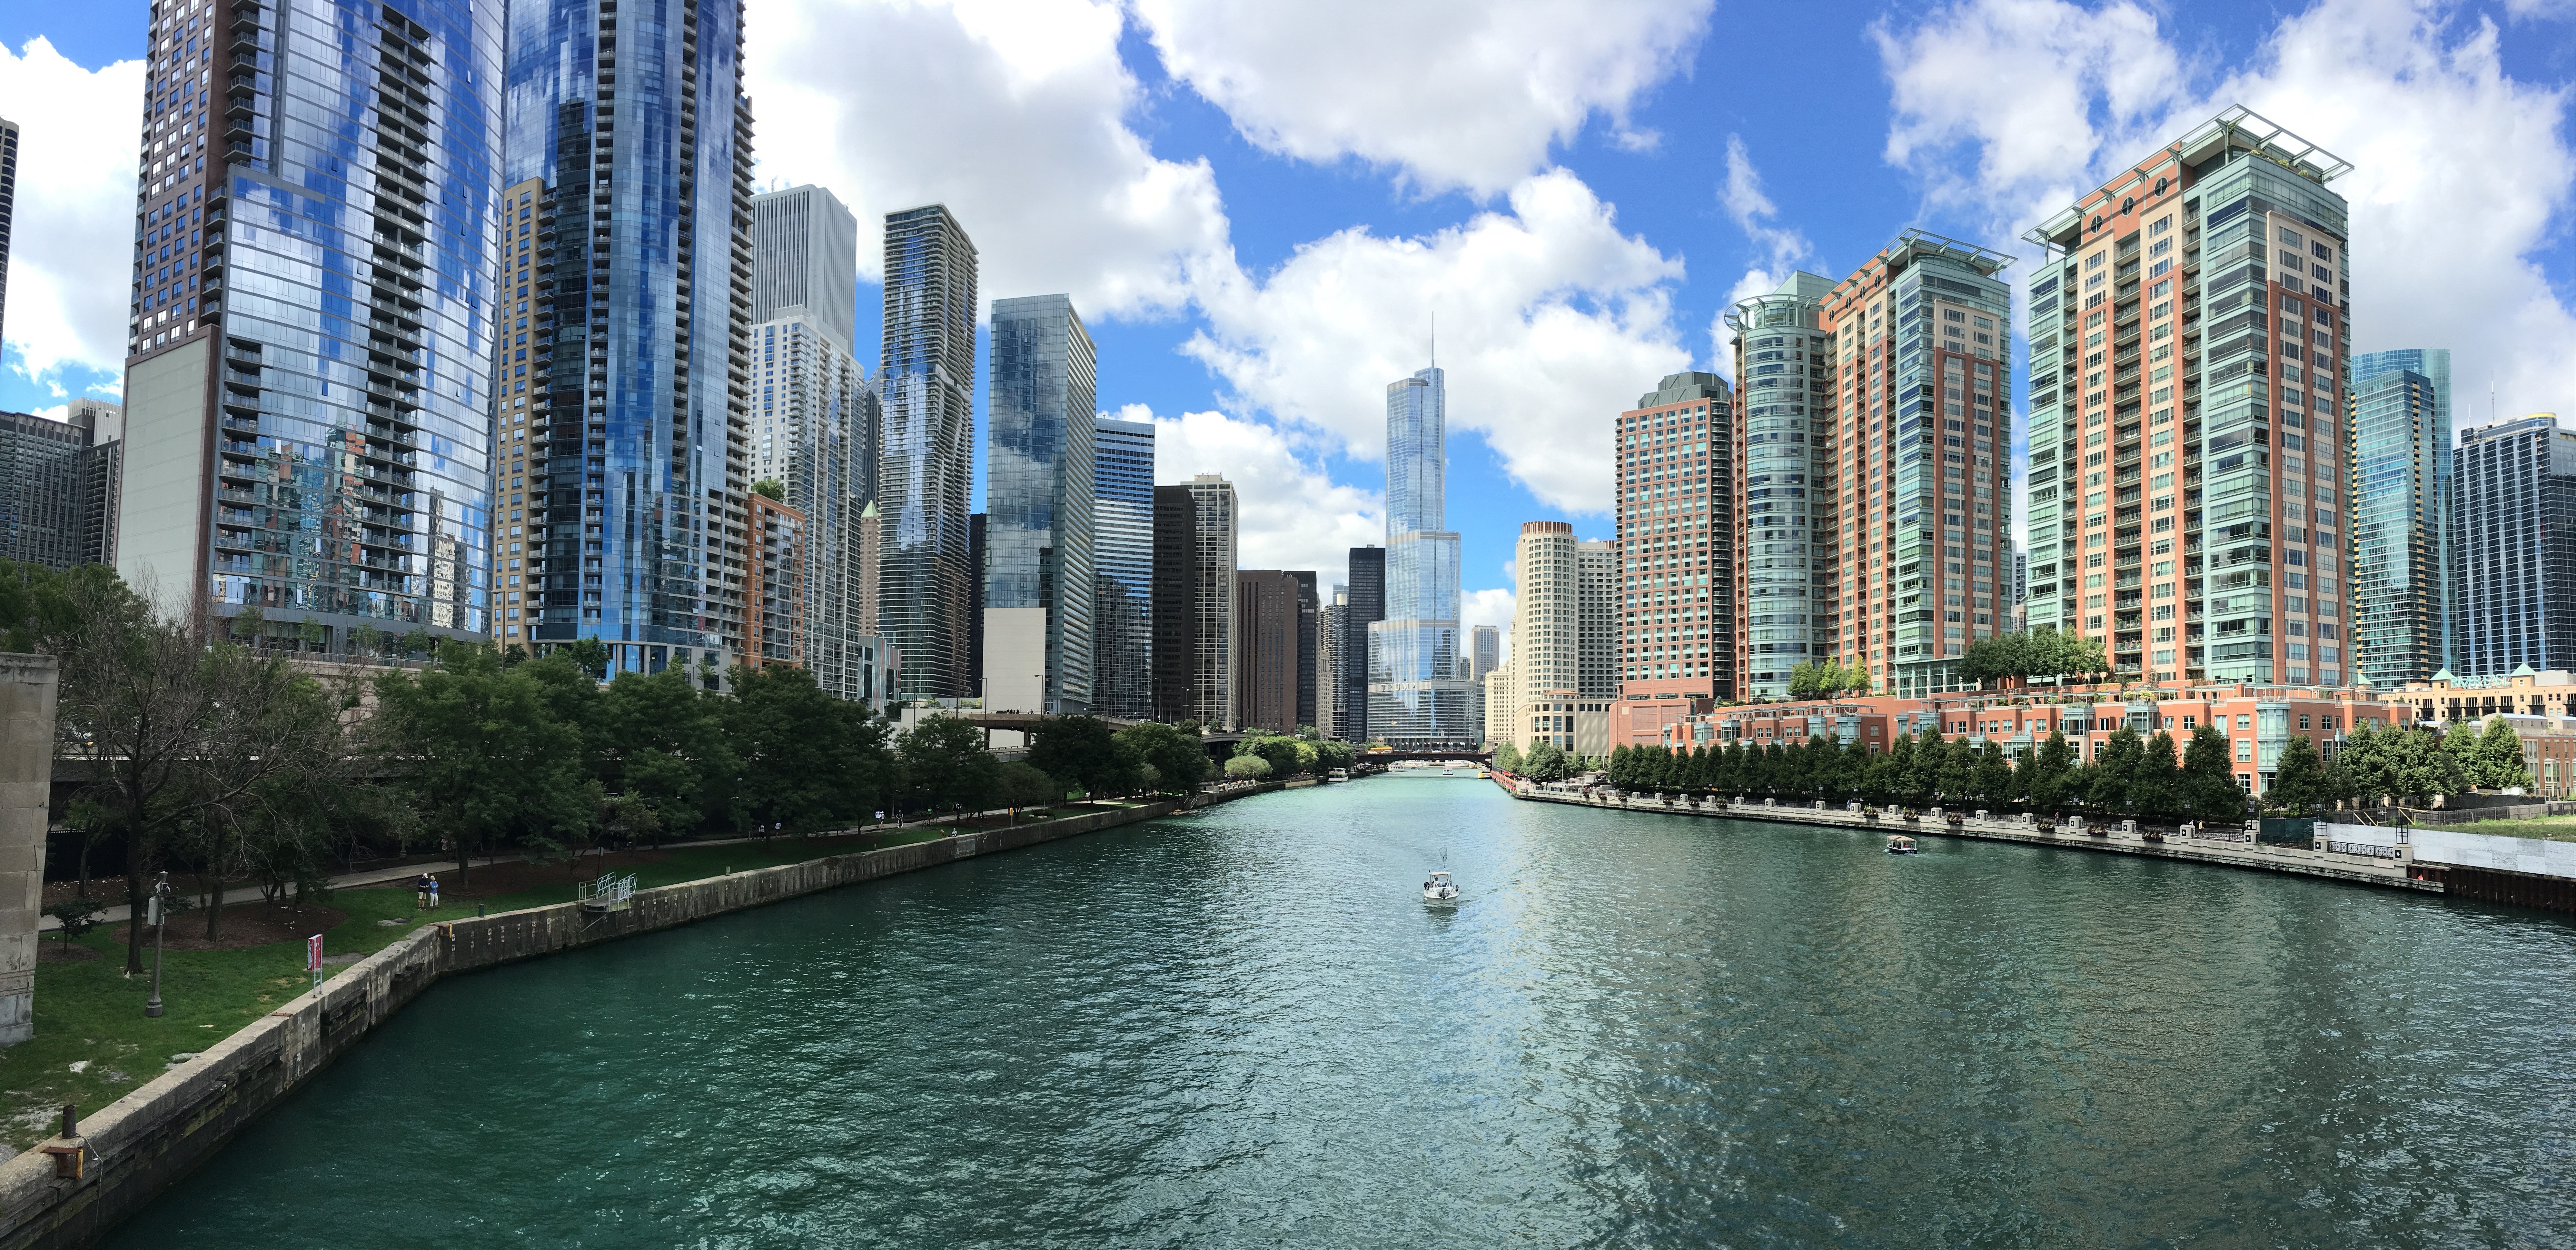 https://res.cloudinary.com/see-sight-tours/image/upload/v1619811882/chicago-river-skyscrapers.jpg